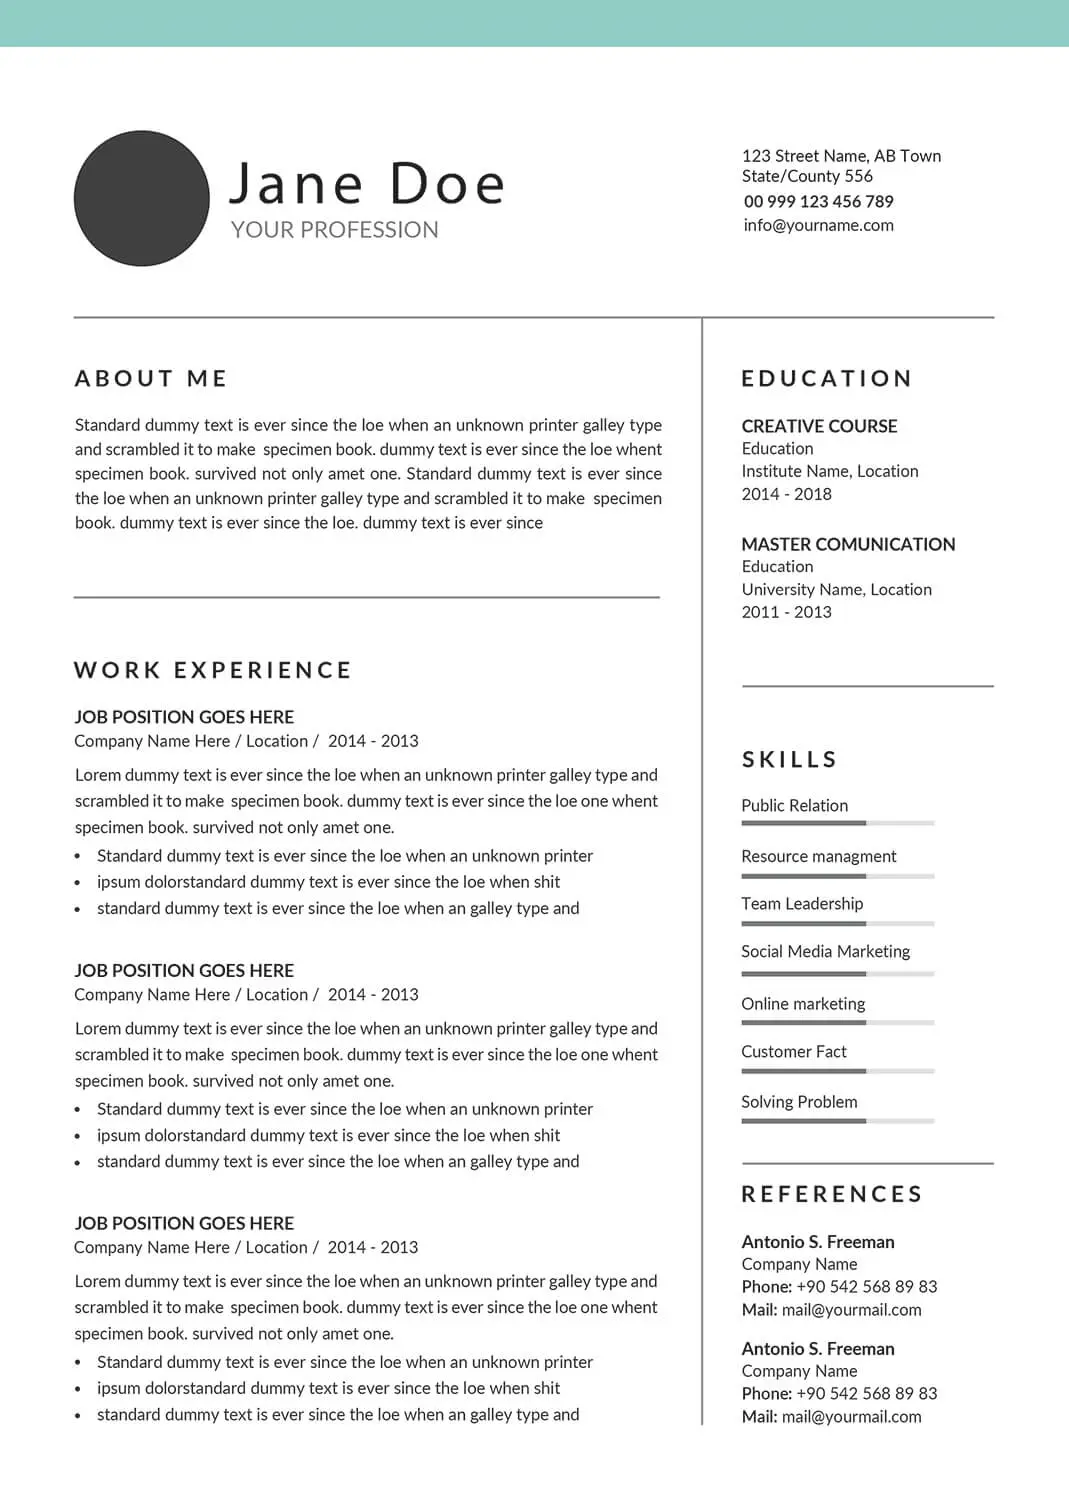 Best resume format for telemarketers